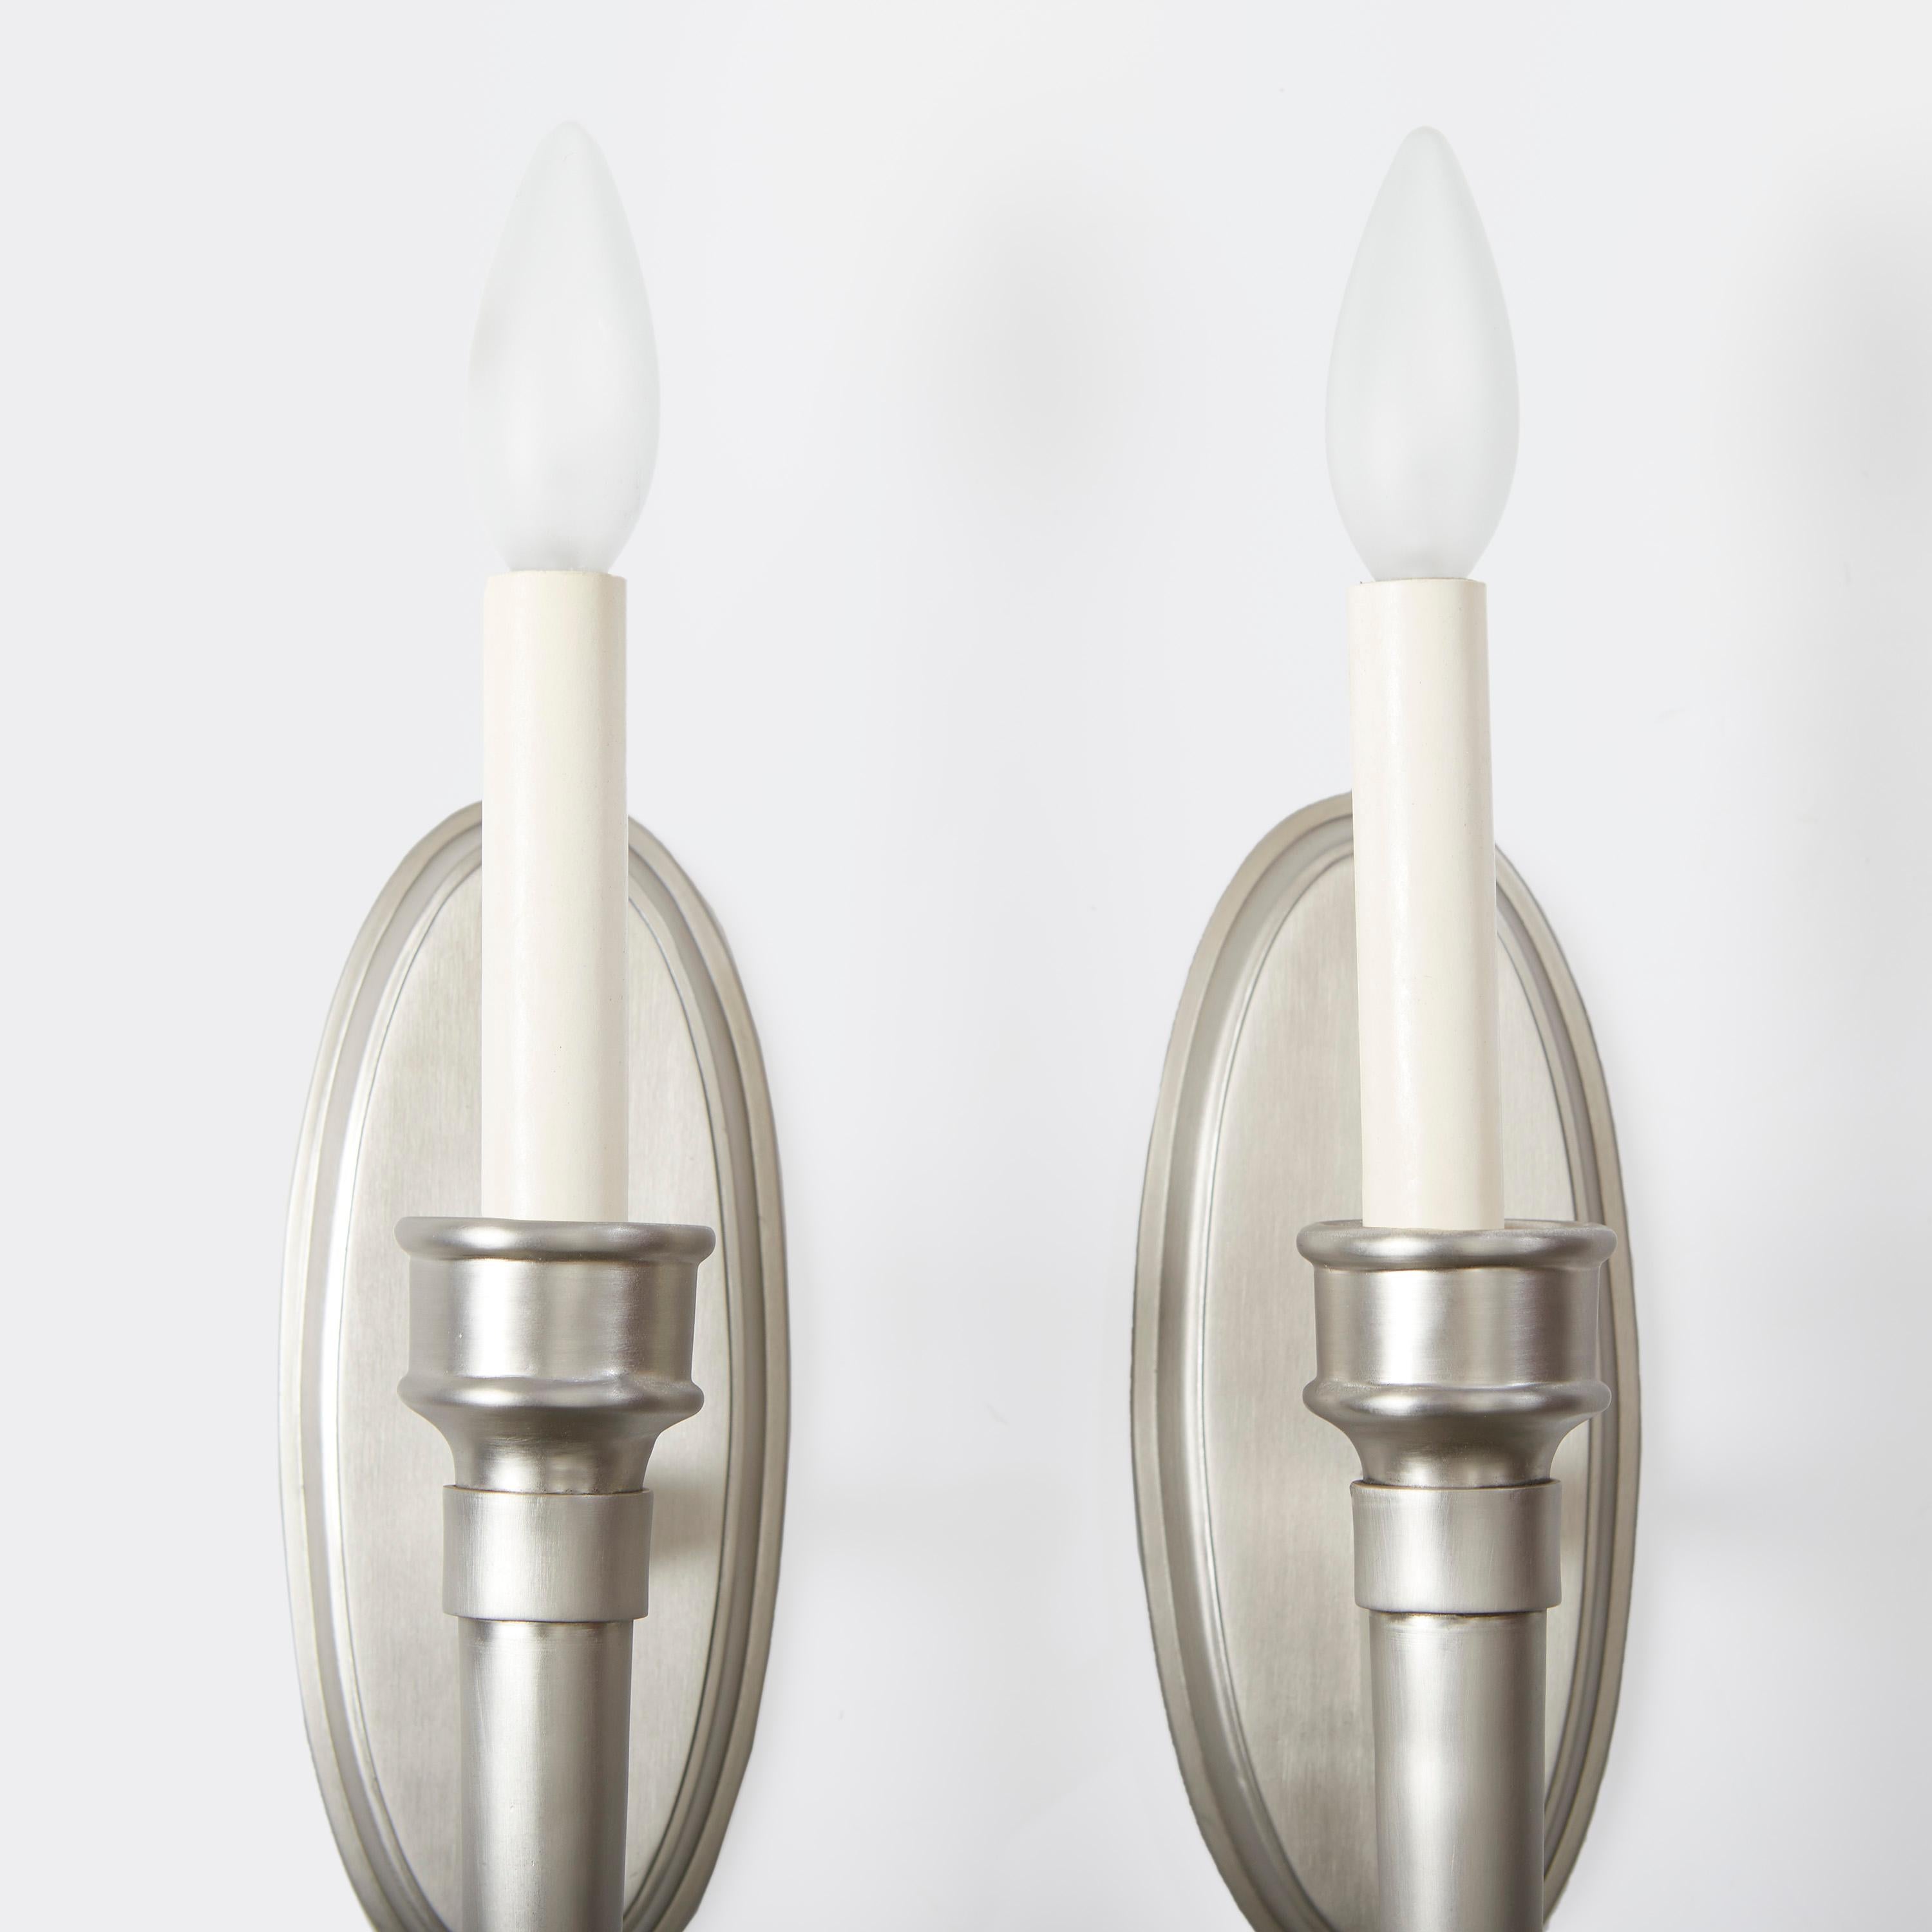 Pair of Single Light Sconces with Oval Backplate, Nickel Plating by David Duncan In New Condition For Sale In New York, NY